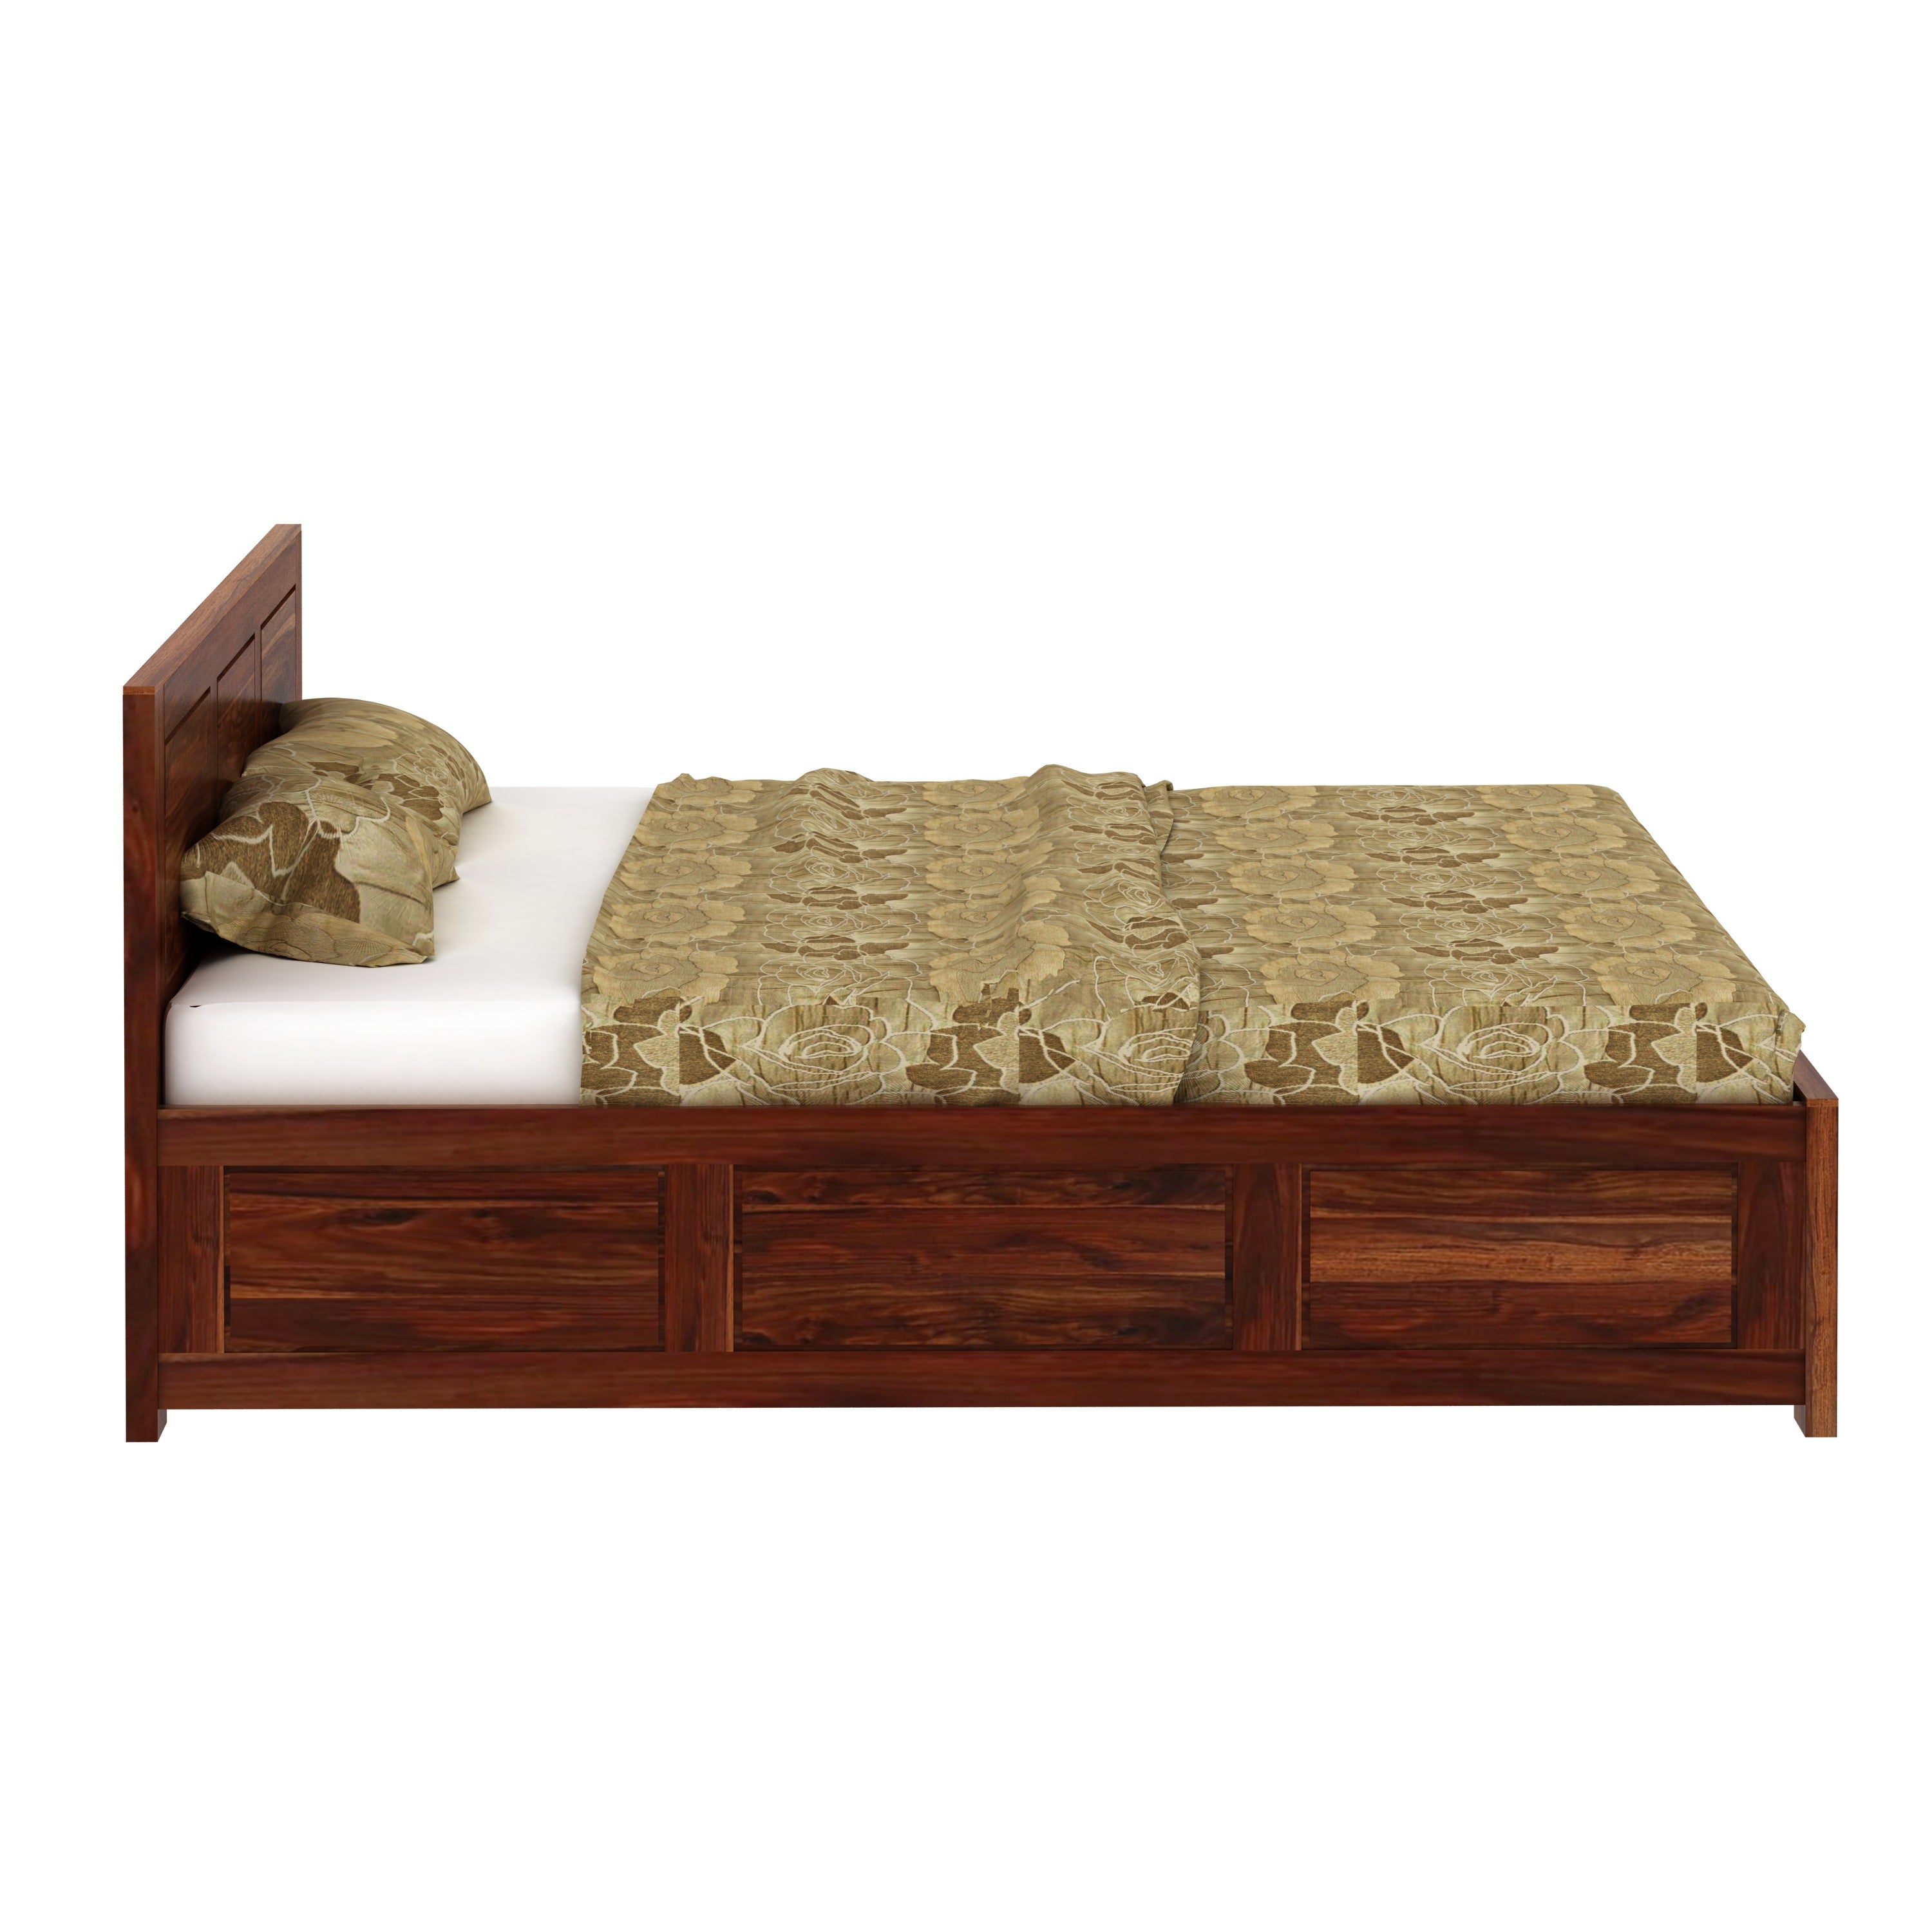 Woodwing Solid Sheesham Wood Bed With Box Storage (King Size, Natural Finish)